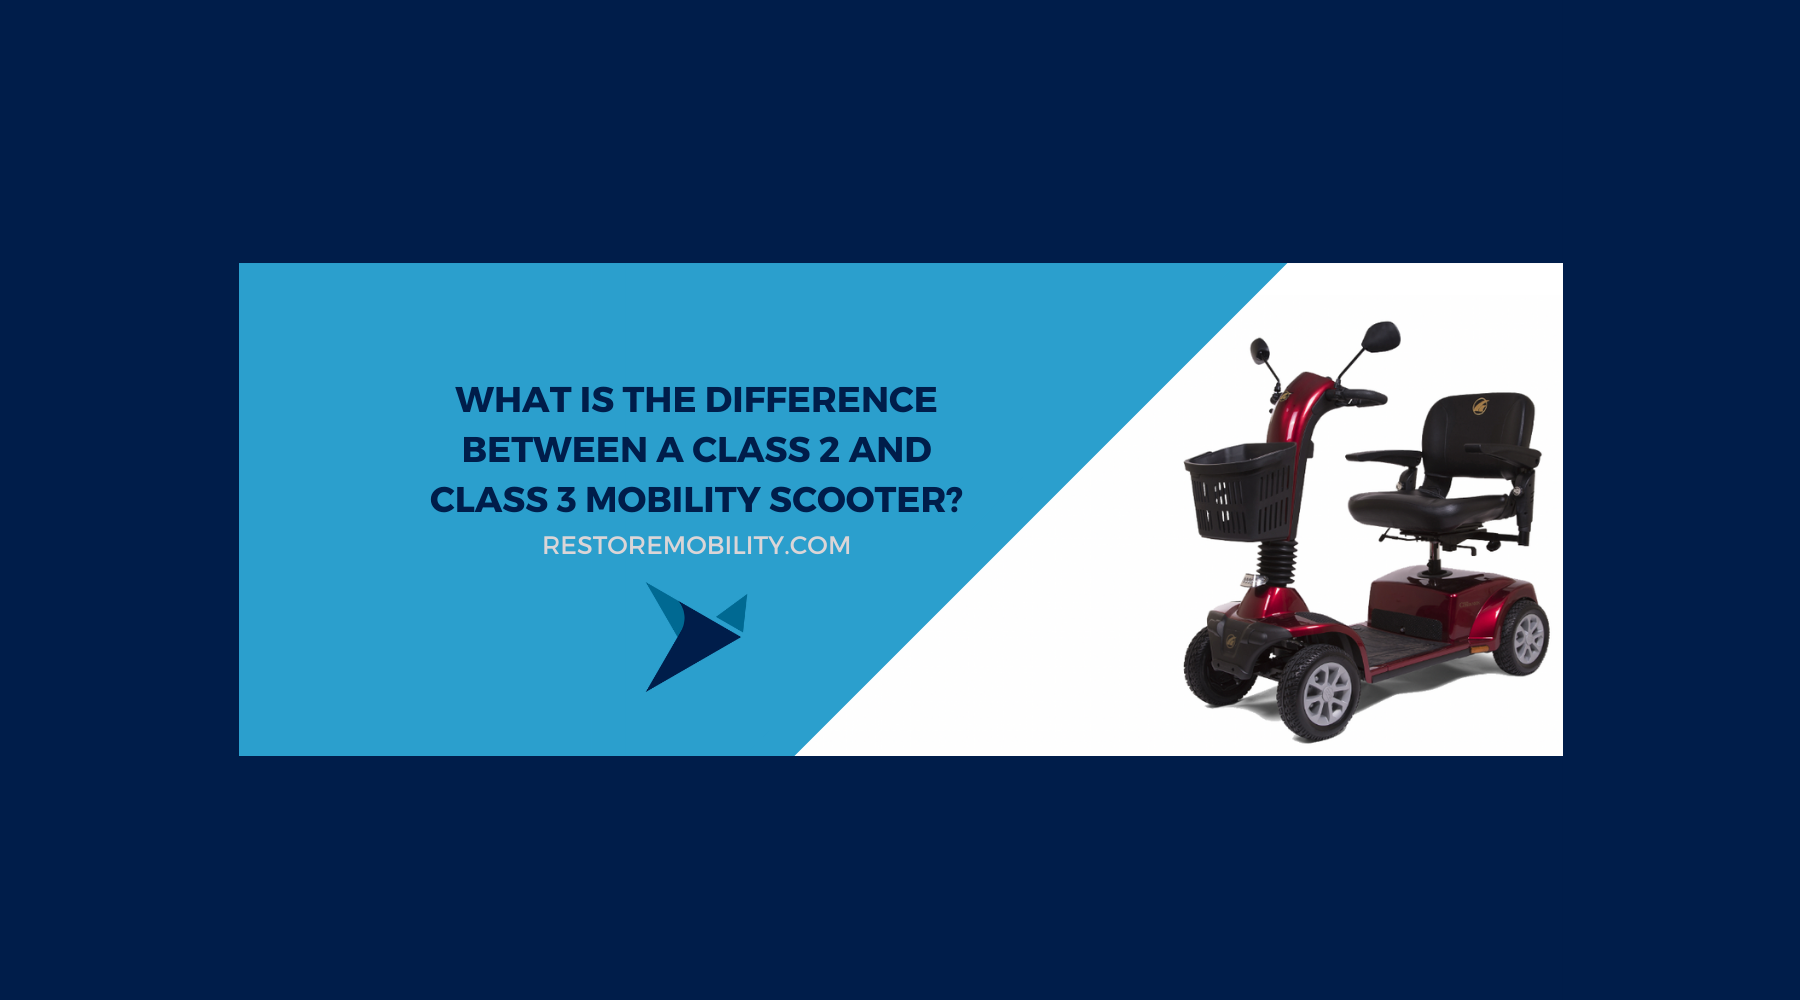 What's the Difference Between Class 2 and 3 Mobility Scooters?